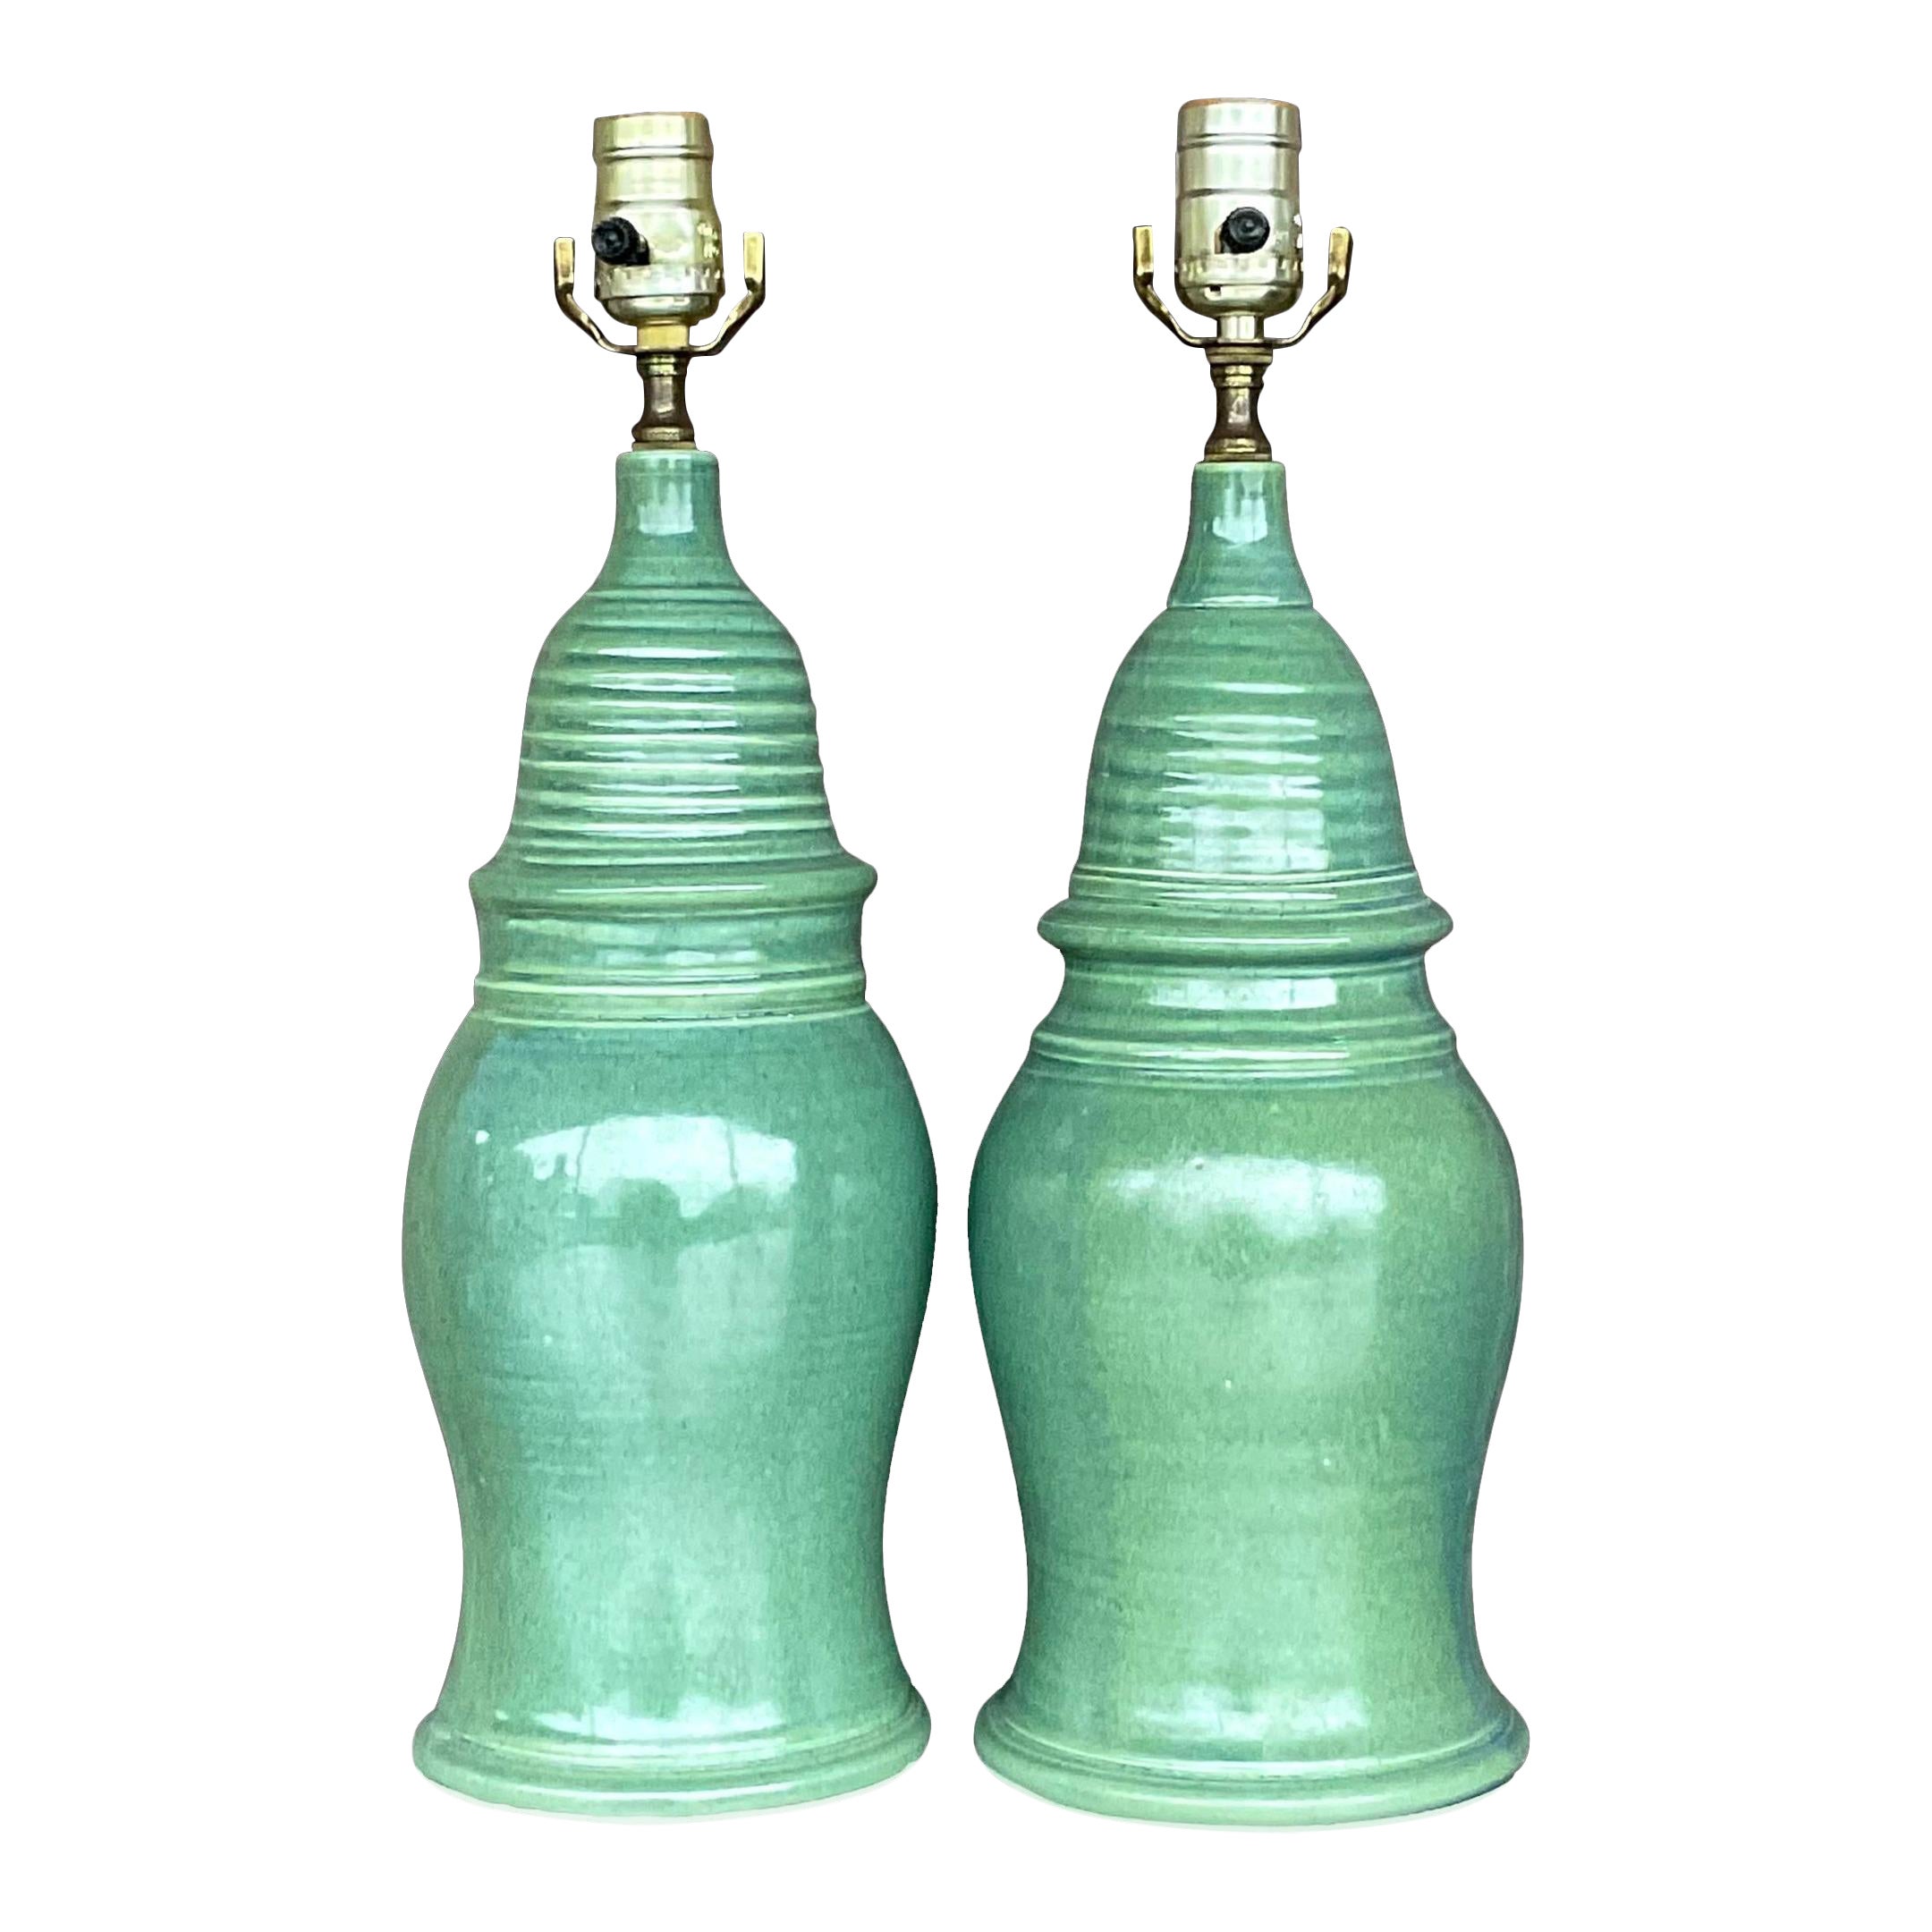 Vintage Boho Glazed Ceramic Table Lamps - a Pair For Sale